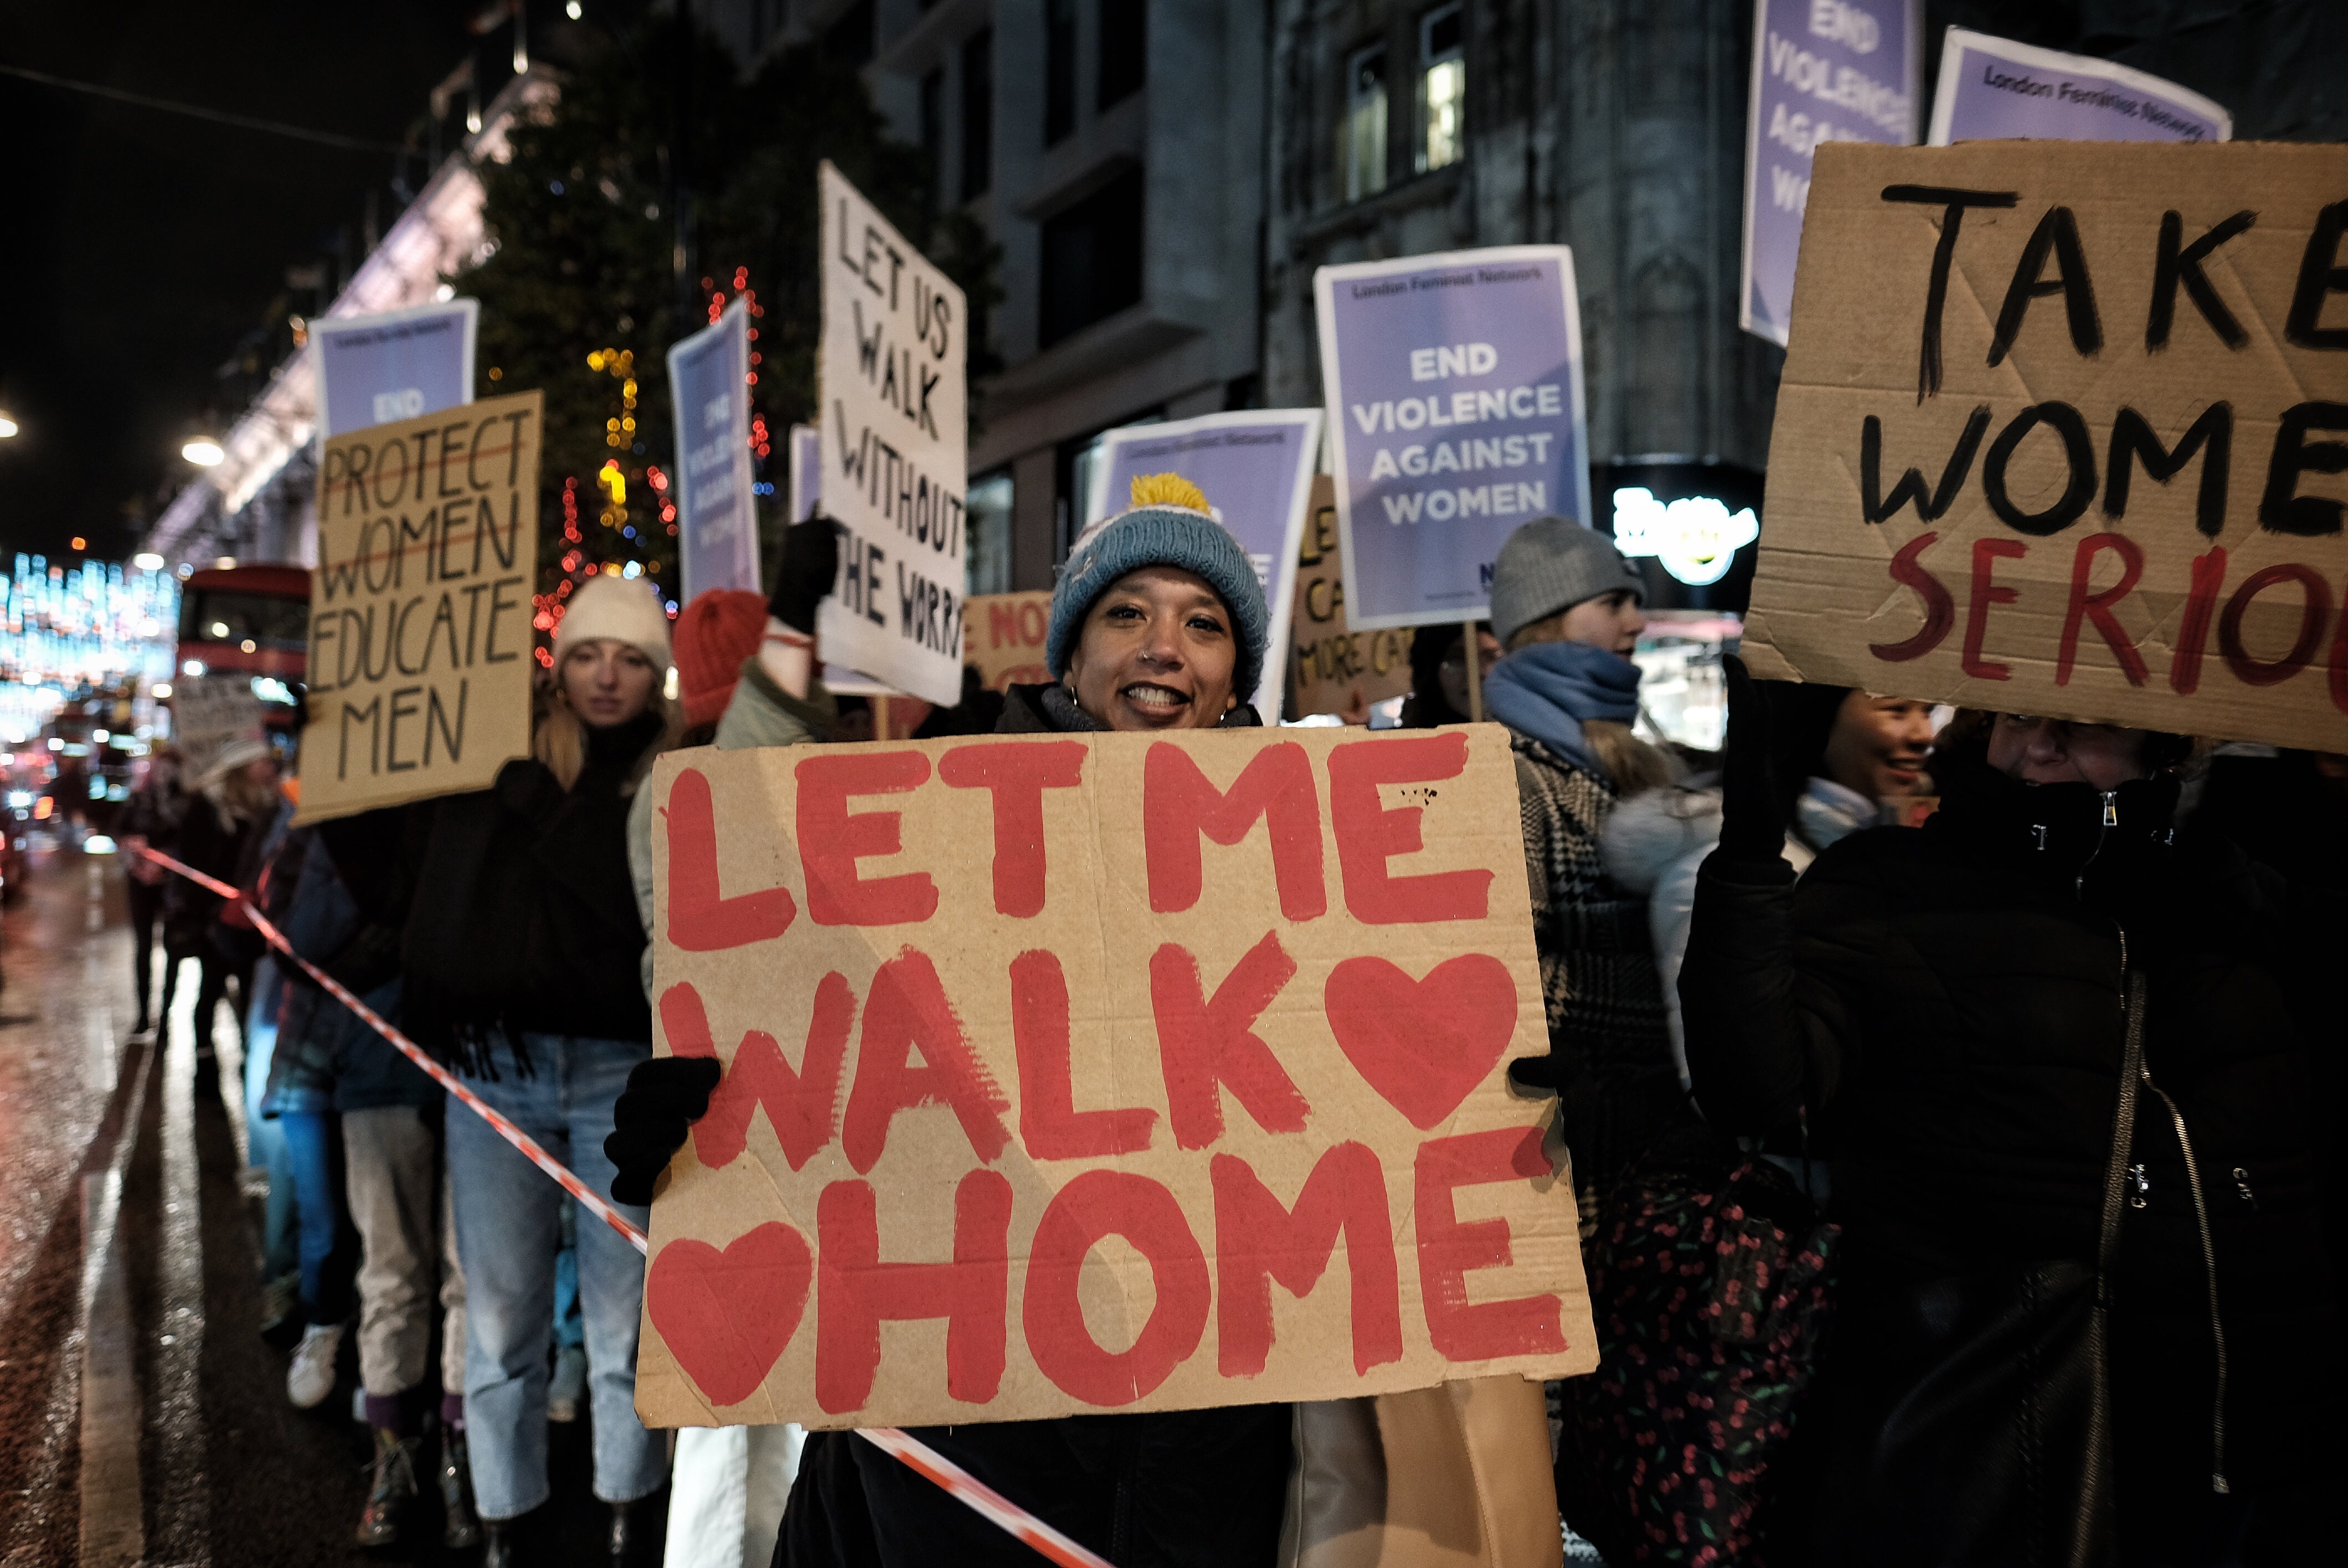 Thousands join the ‘Reclaim the Night’ in London to mark the International Day for the Elimination of Violence Against Women on 25 November